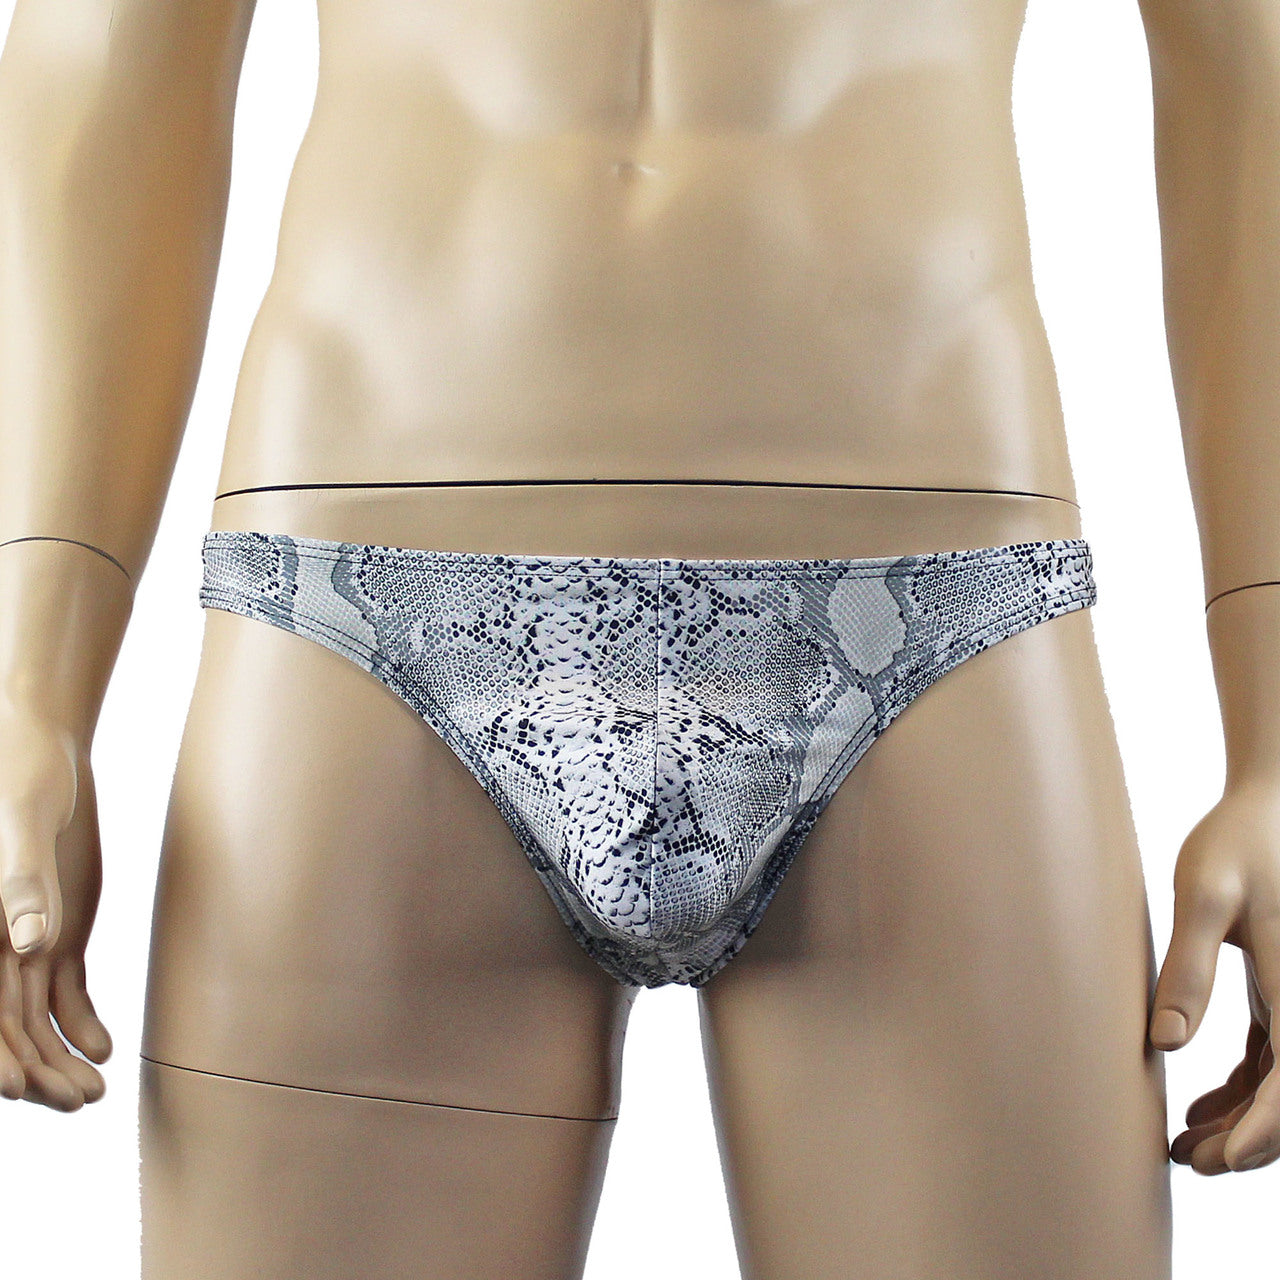 Mens Bra Top Camisole and Thong in Grey Snake Print & Black Lace